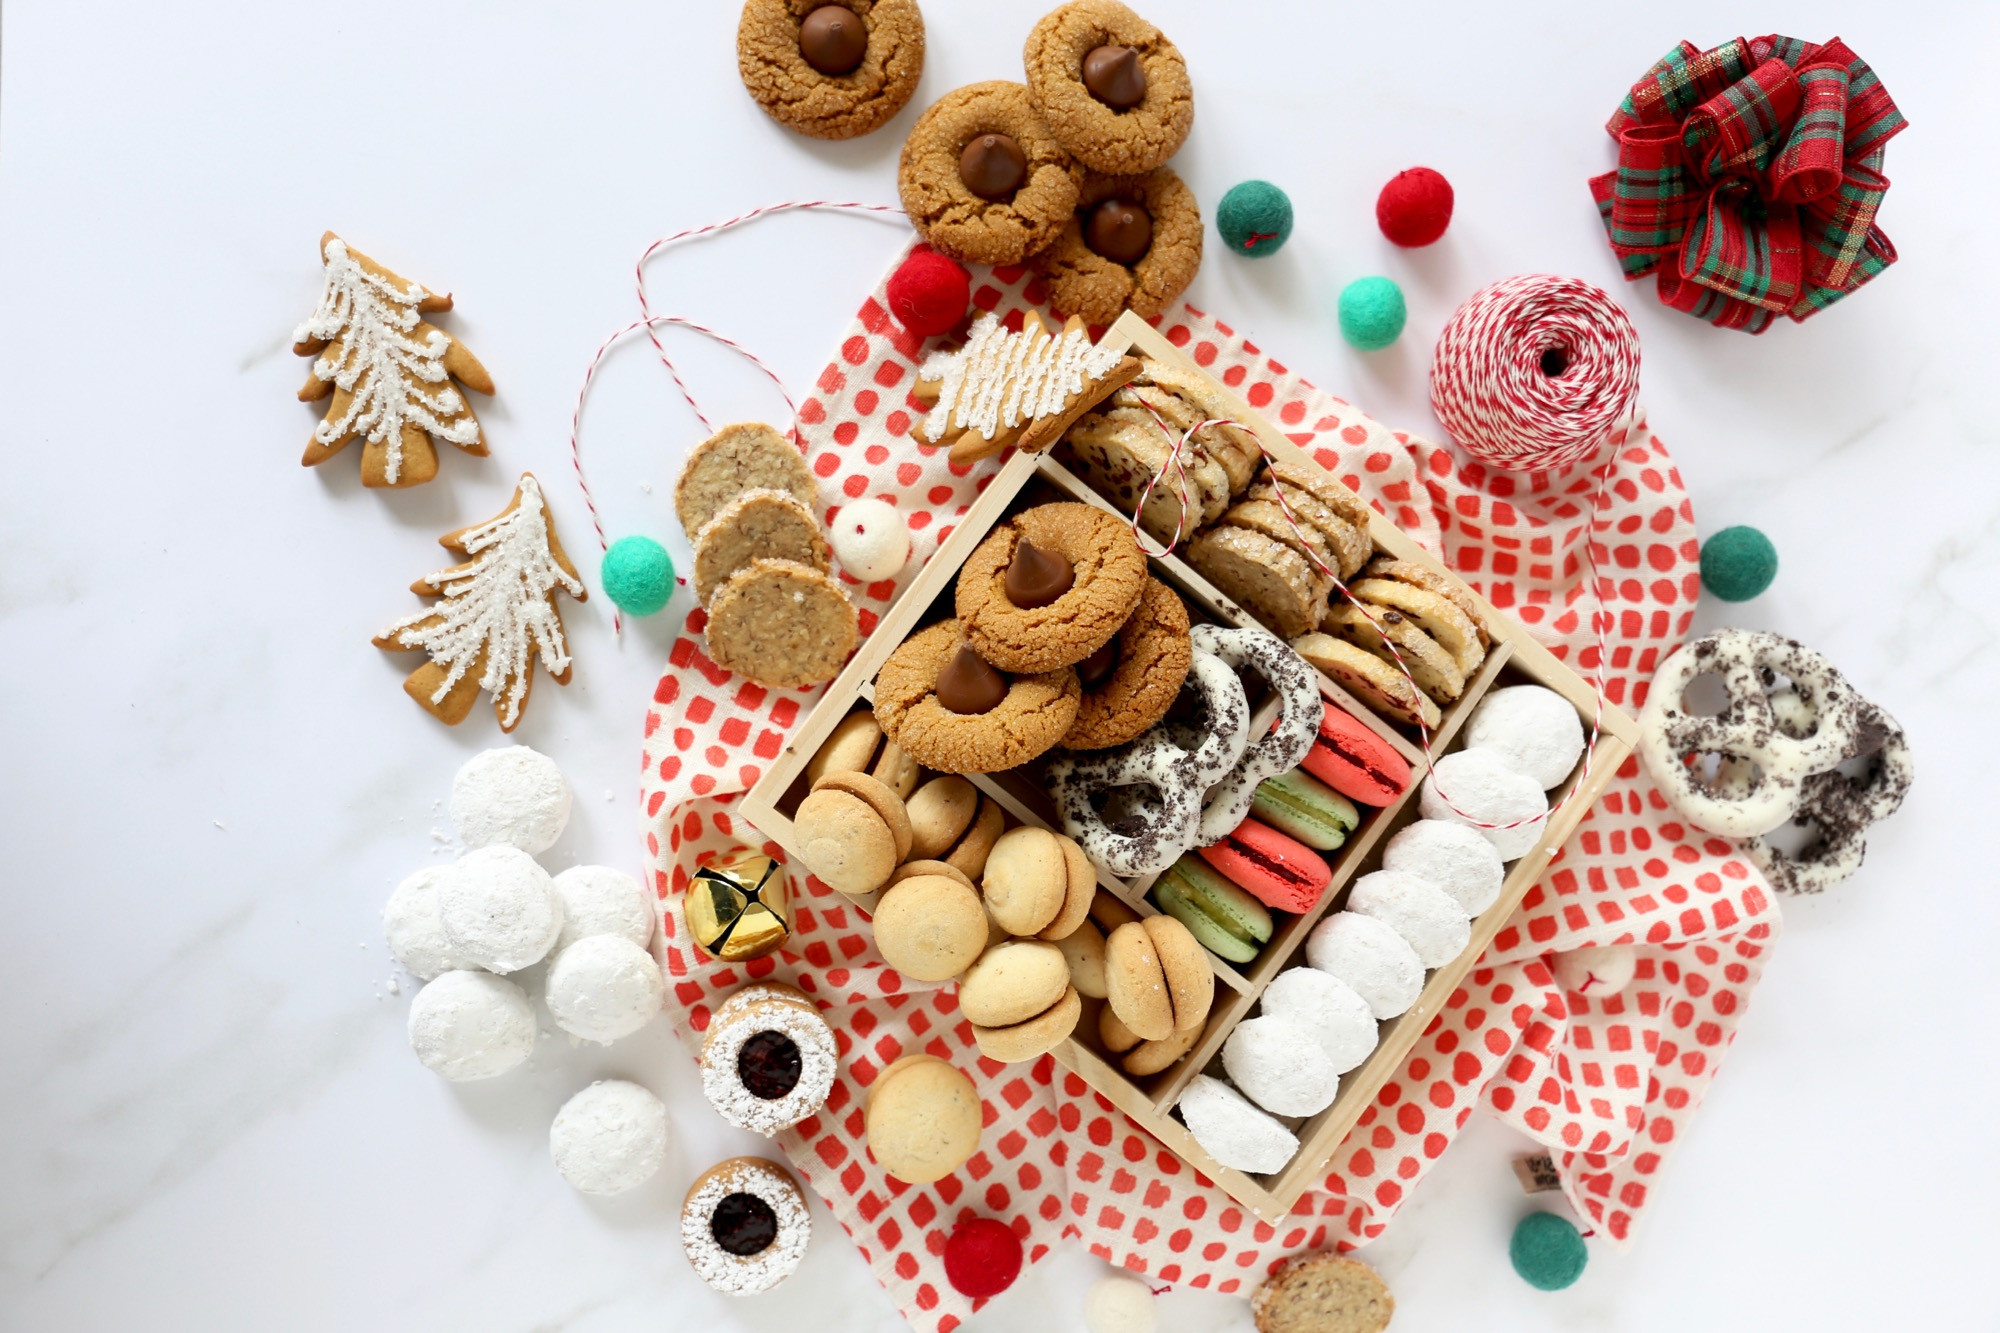 Holiday Cookies Gift Ideas
 Homemade Holiday Cookie Gifts